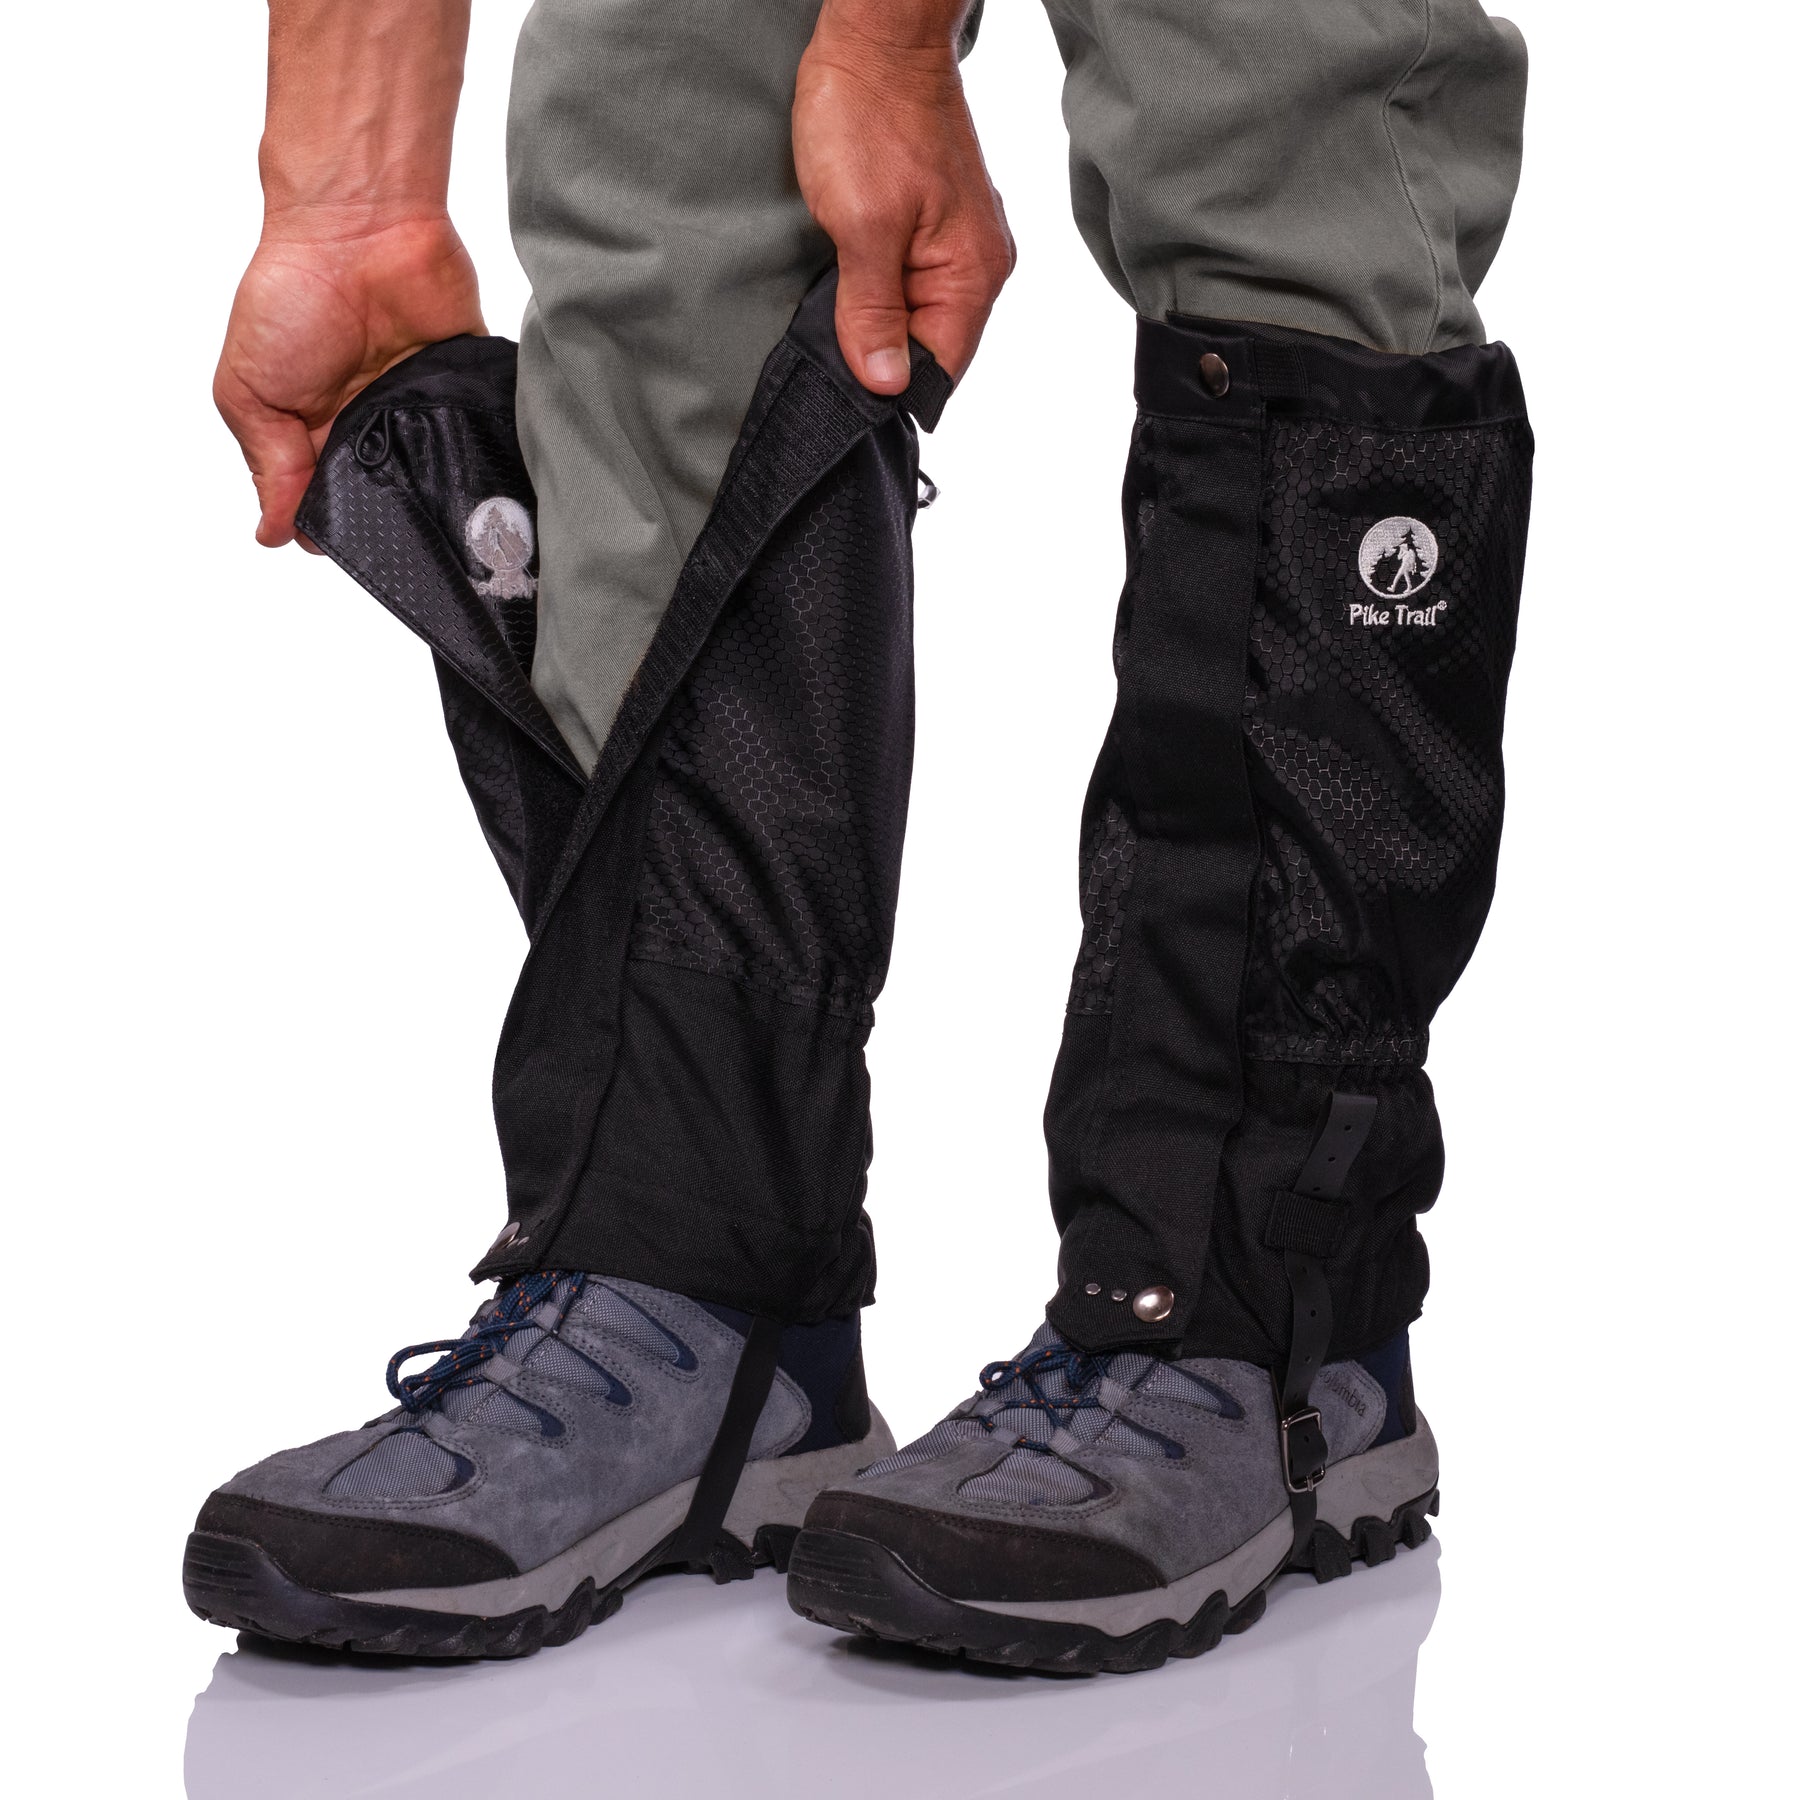 Pike Trail Leg and Ankle Gaiters for Men and Women - Waterproof Boot Covers - for Hiking, Research Field Trips, Outdoor Trail Use, Snow and More - Ad